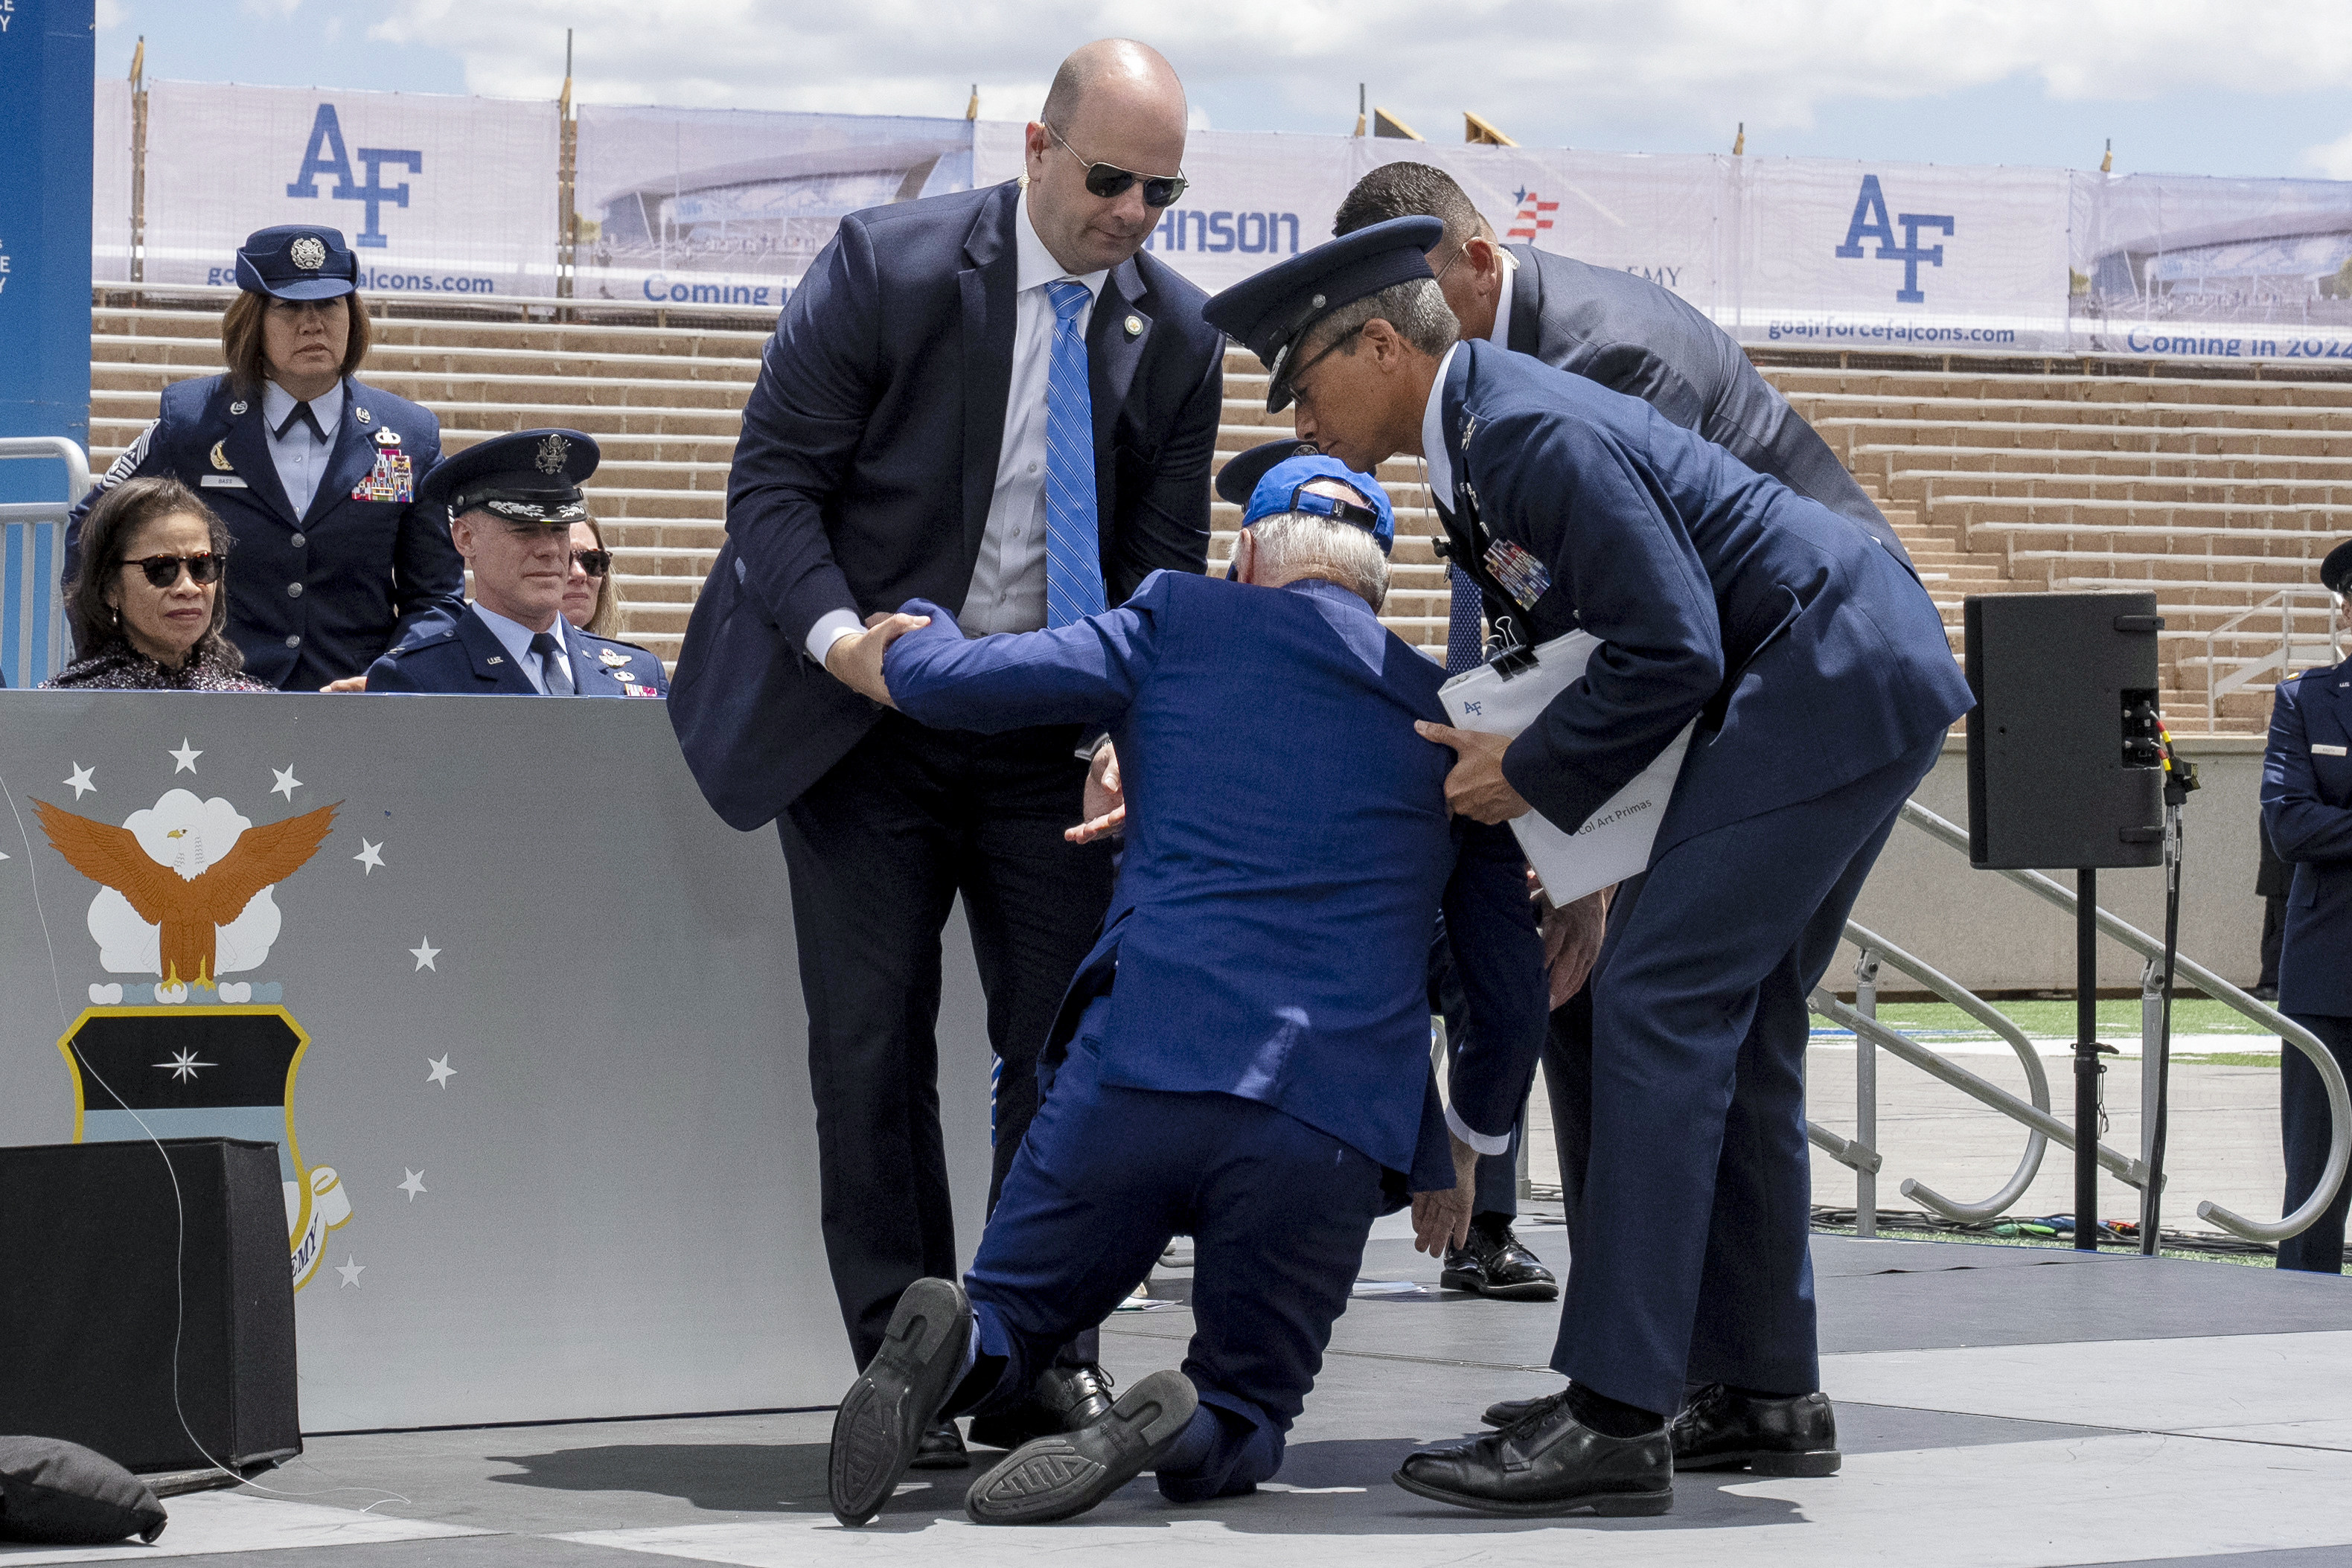 US President Joe Biden falls on stage during the United States Air Force Academy graduation ceremony at Falcon Stadium in Colorado Springs on Thursday. Photo: AP